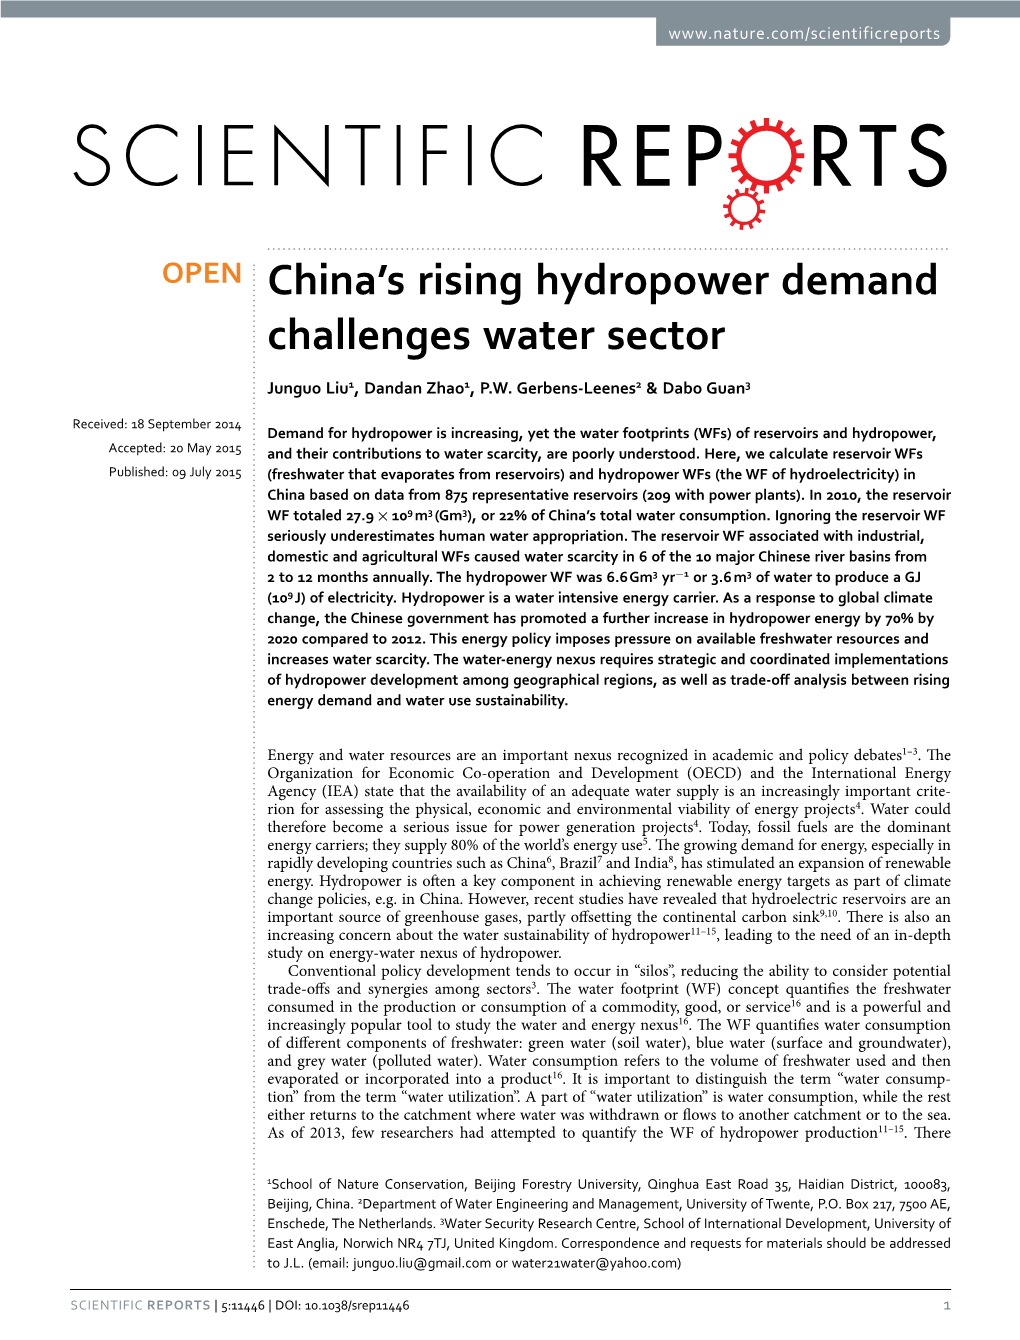 China's Rising Hydropower Demand Challenges Water Sector